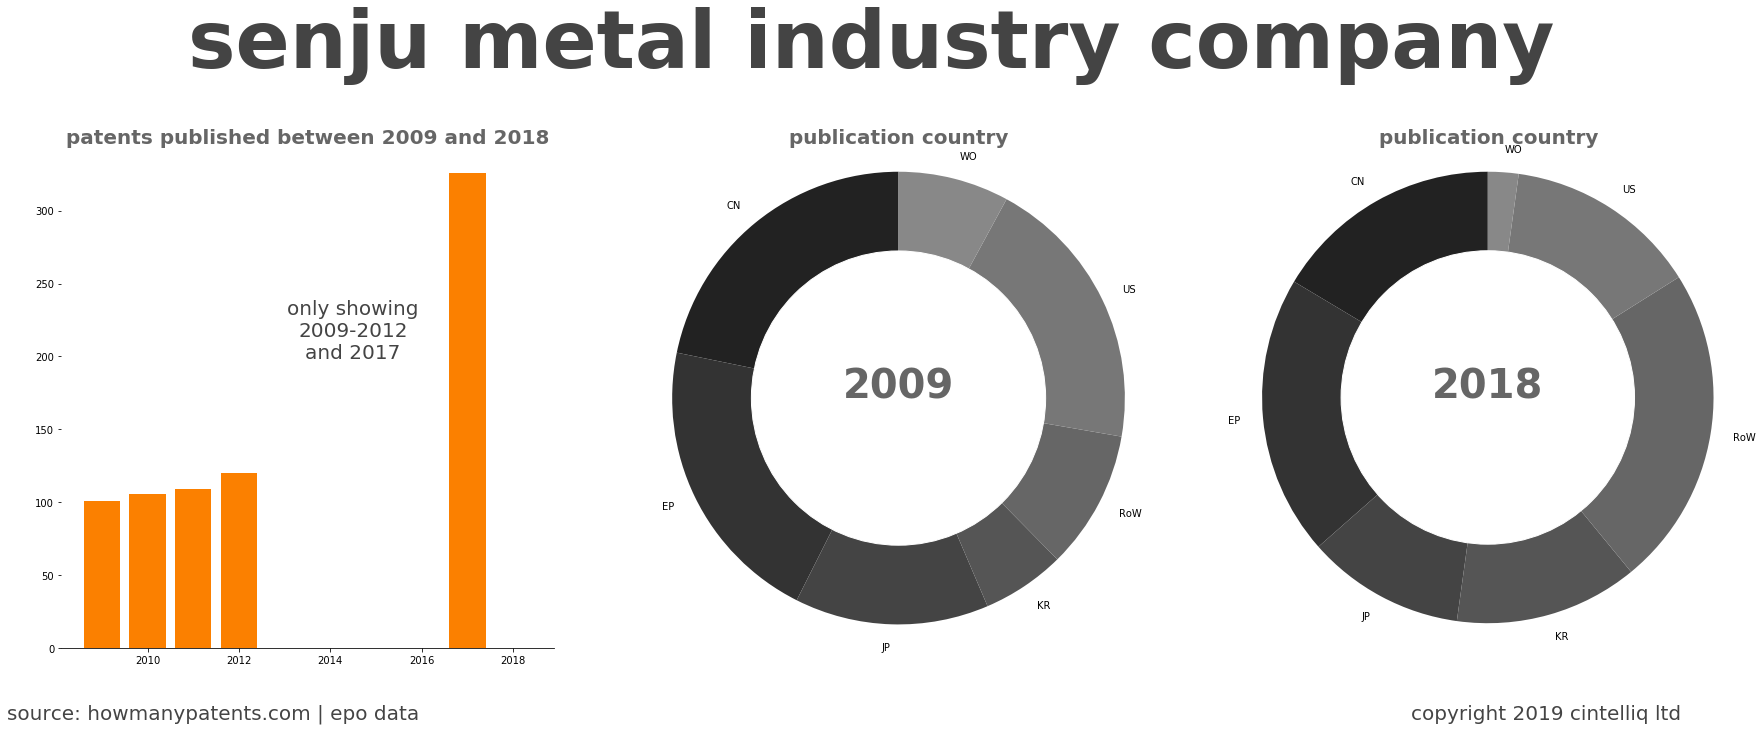 summary of patents for Senju Metal Industry Company